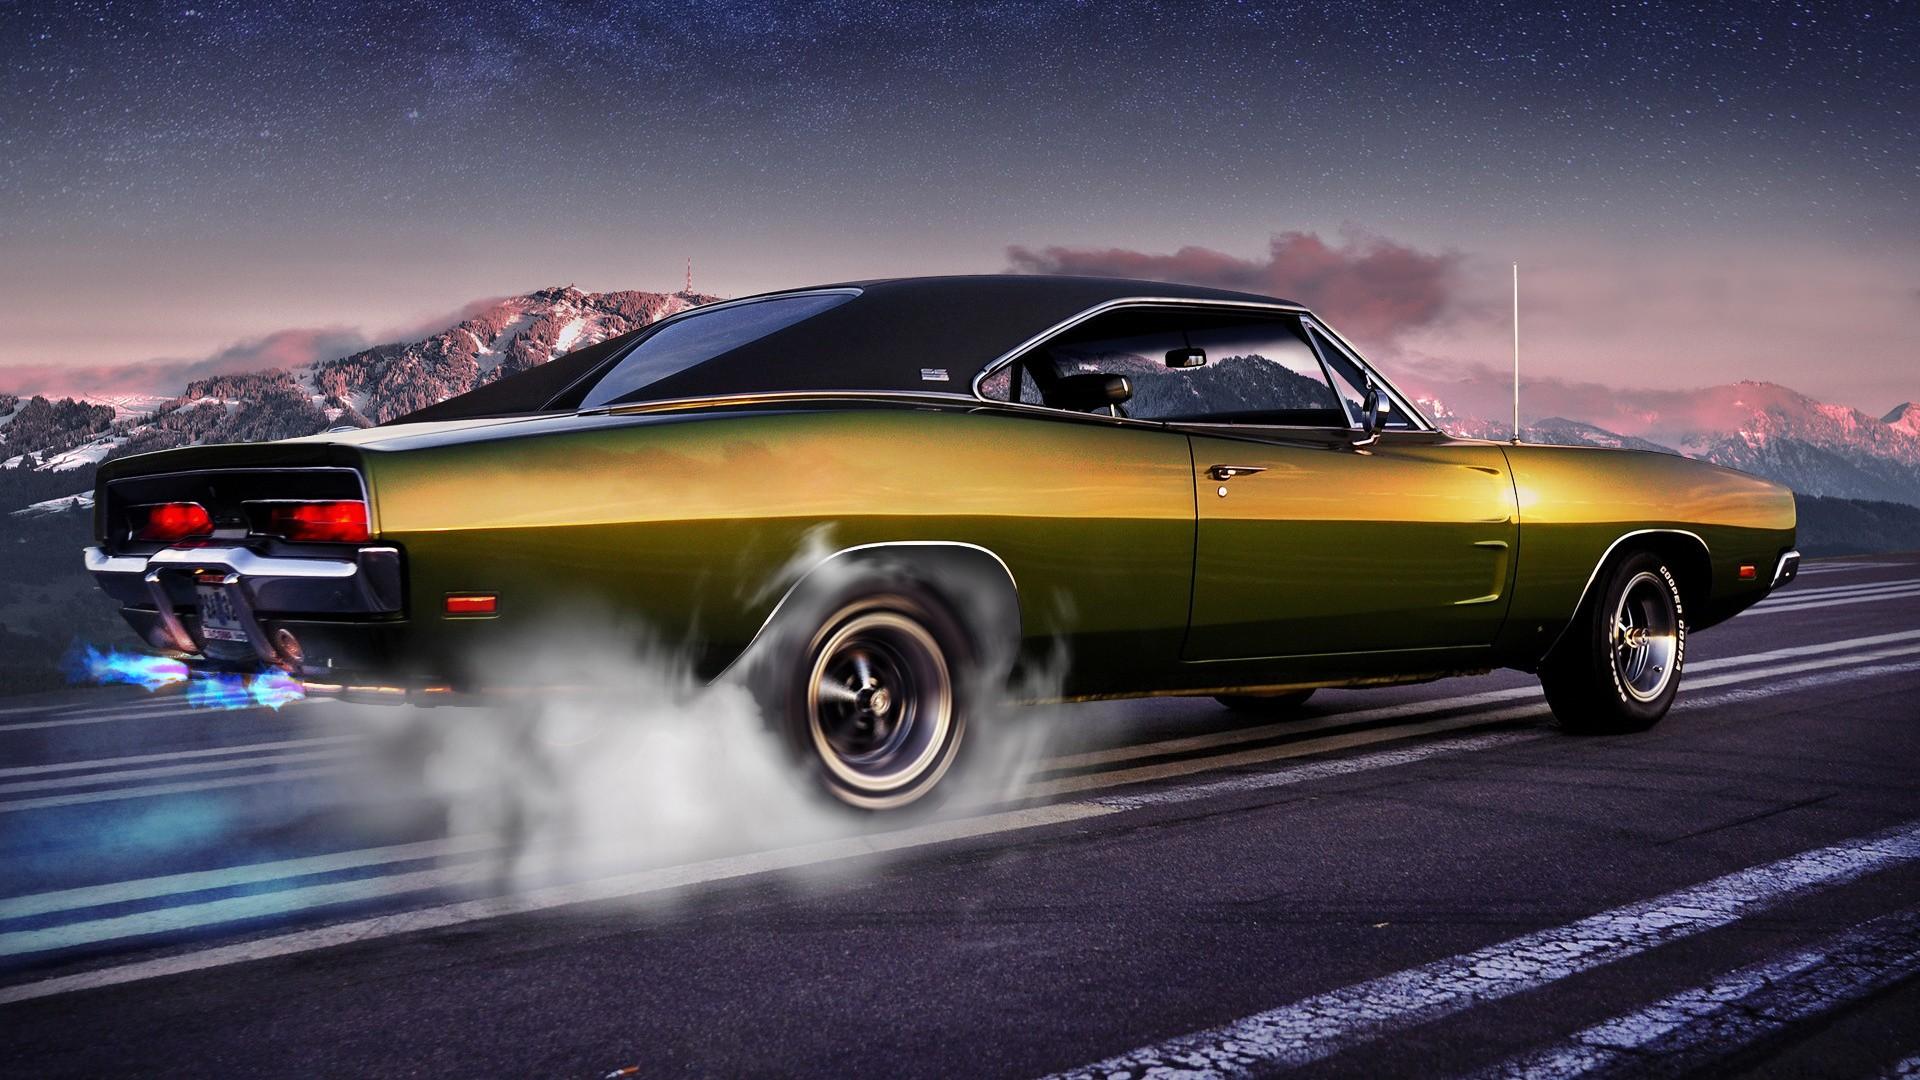 Old Muscle Car HD Wallpaper Site